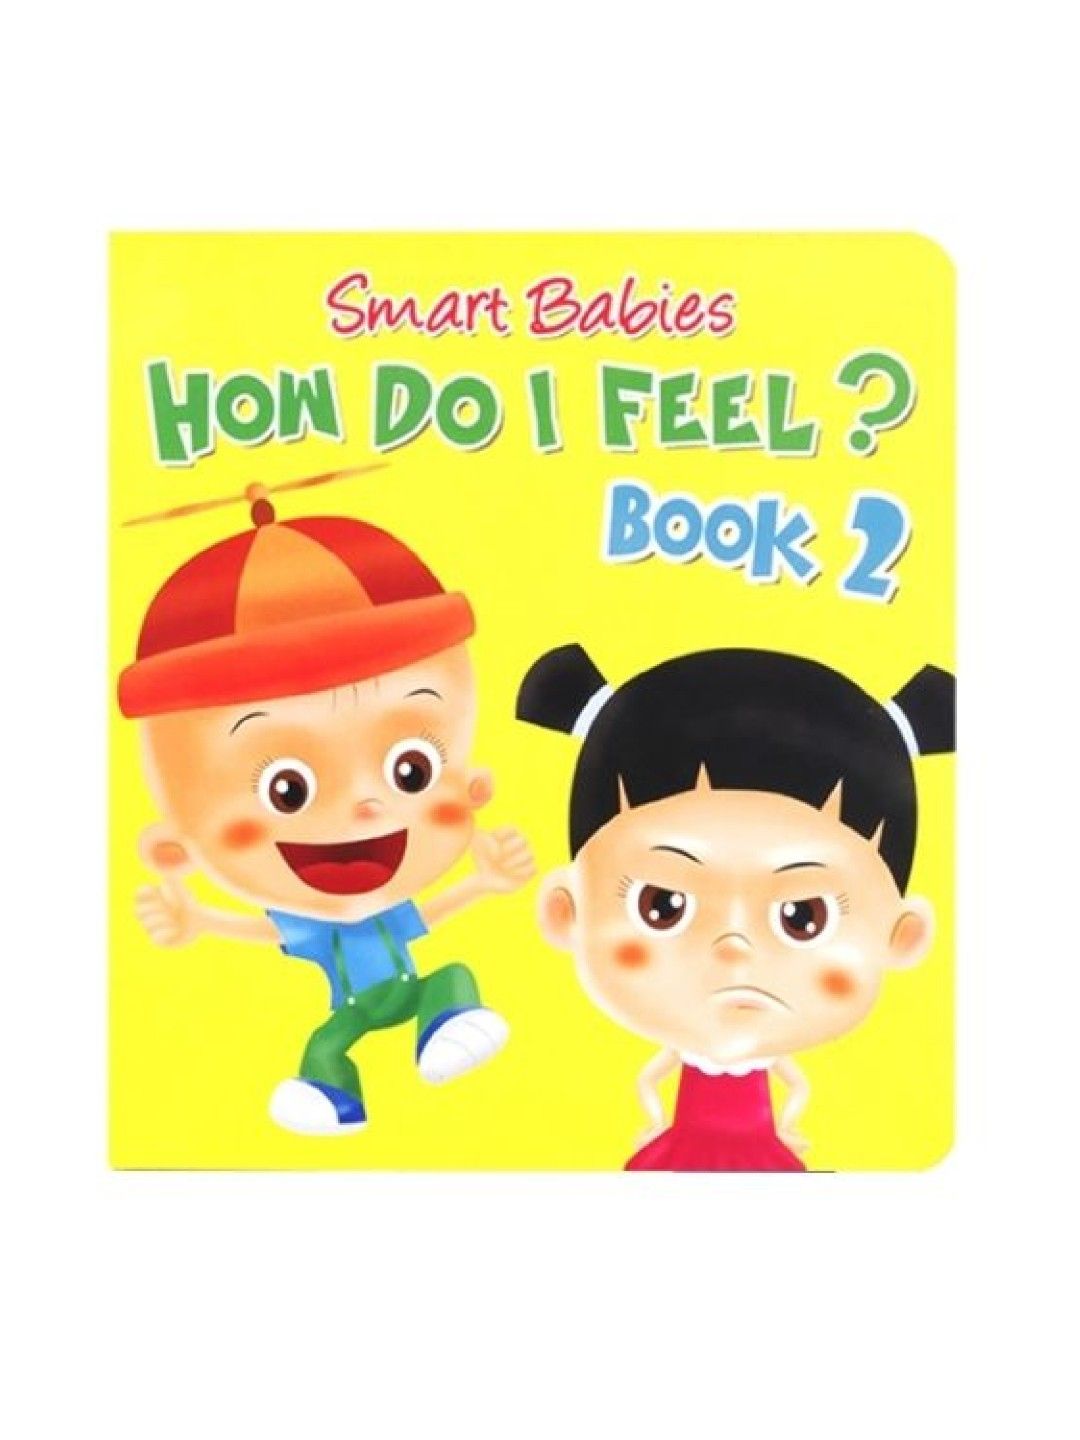 Learning is Fun Smart Babies How Do I Feel Book 2